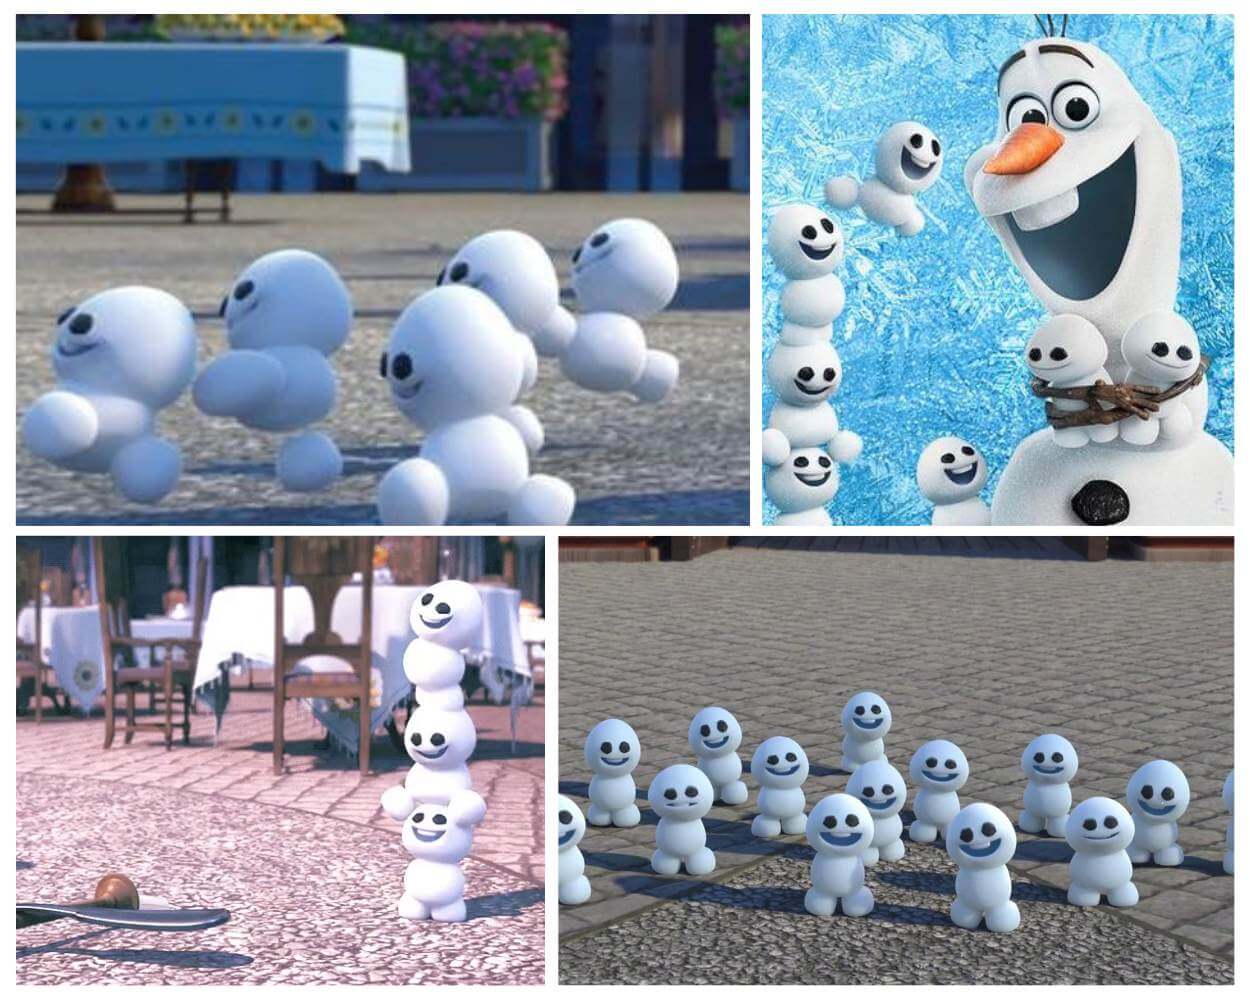 The Snowgies - frozen movies characters